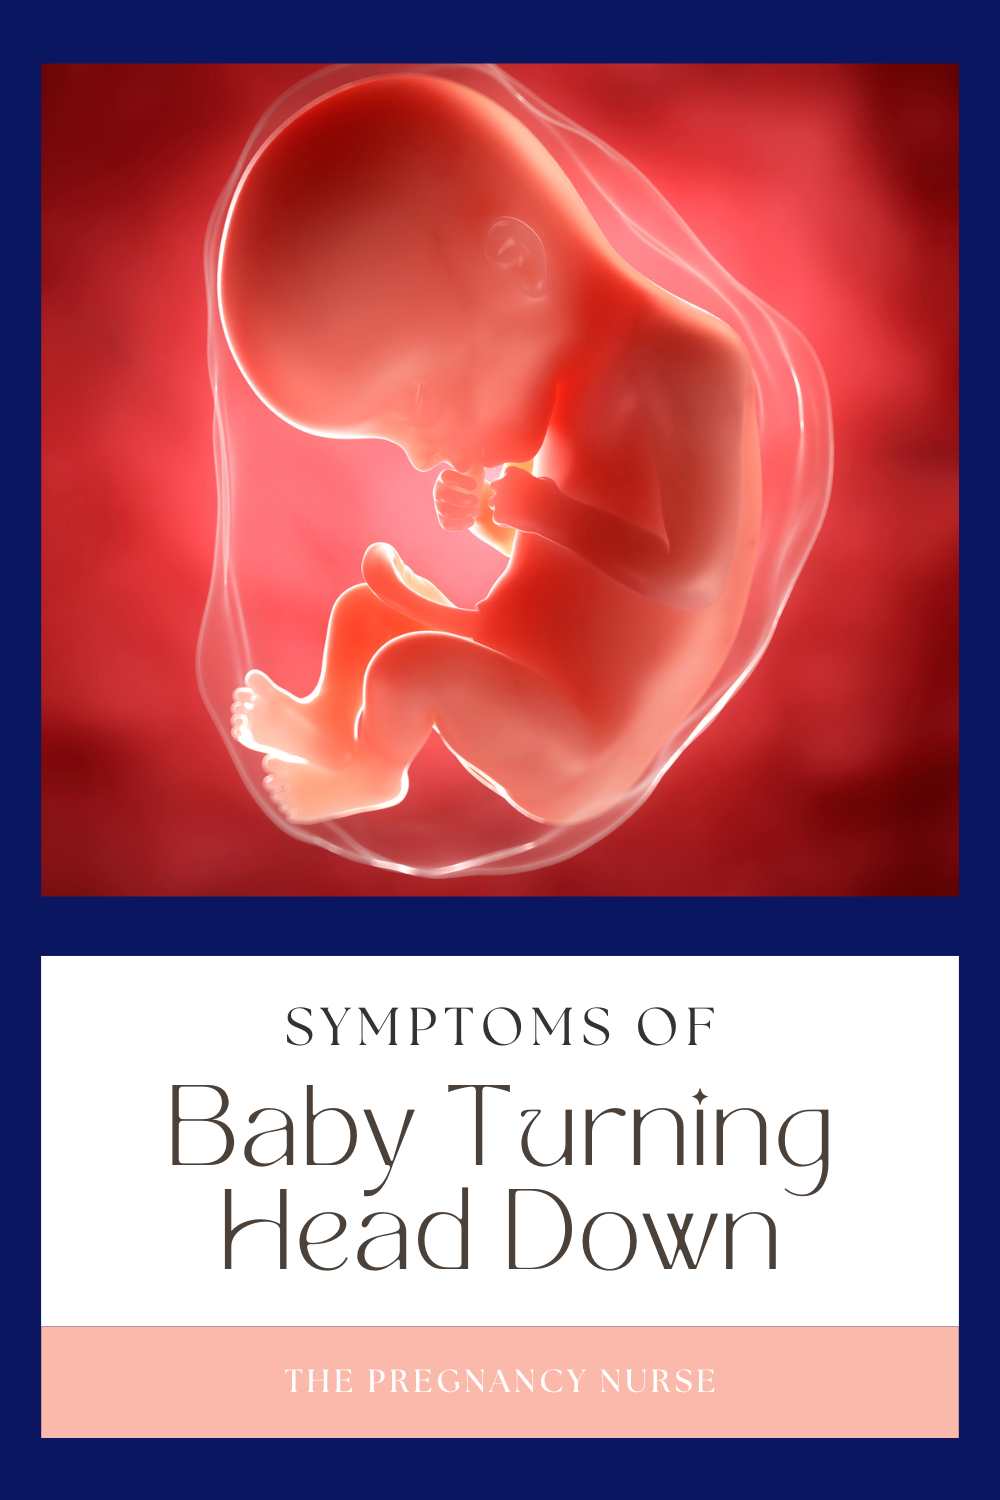 There are many signs that baby has turned head down. This helpful guide will teach you what to look for and what to do if your baby isn't in the right position for birth. Knowing what to expect can help ease your mind during pregnancy.